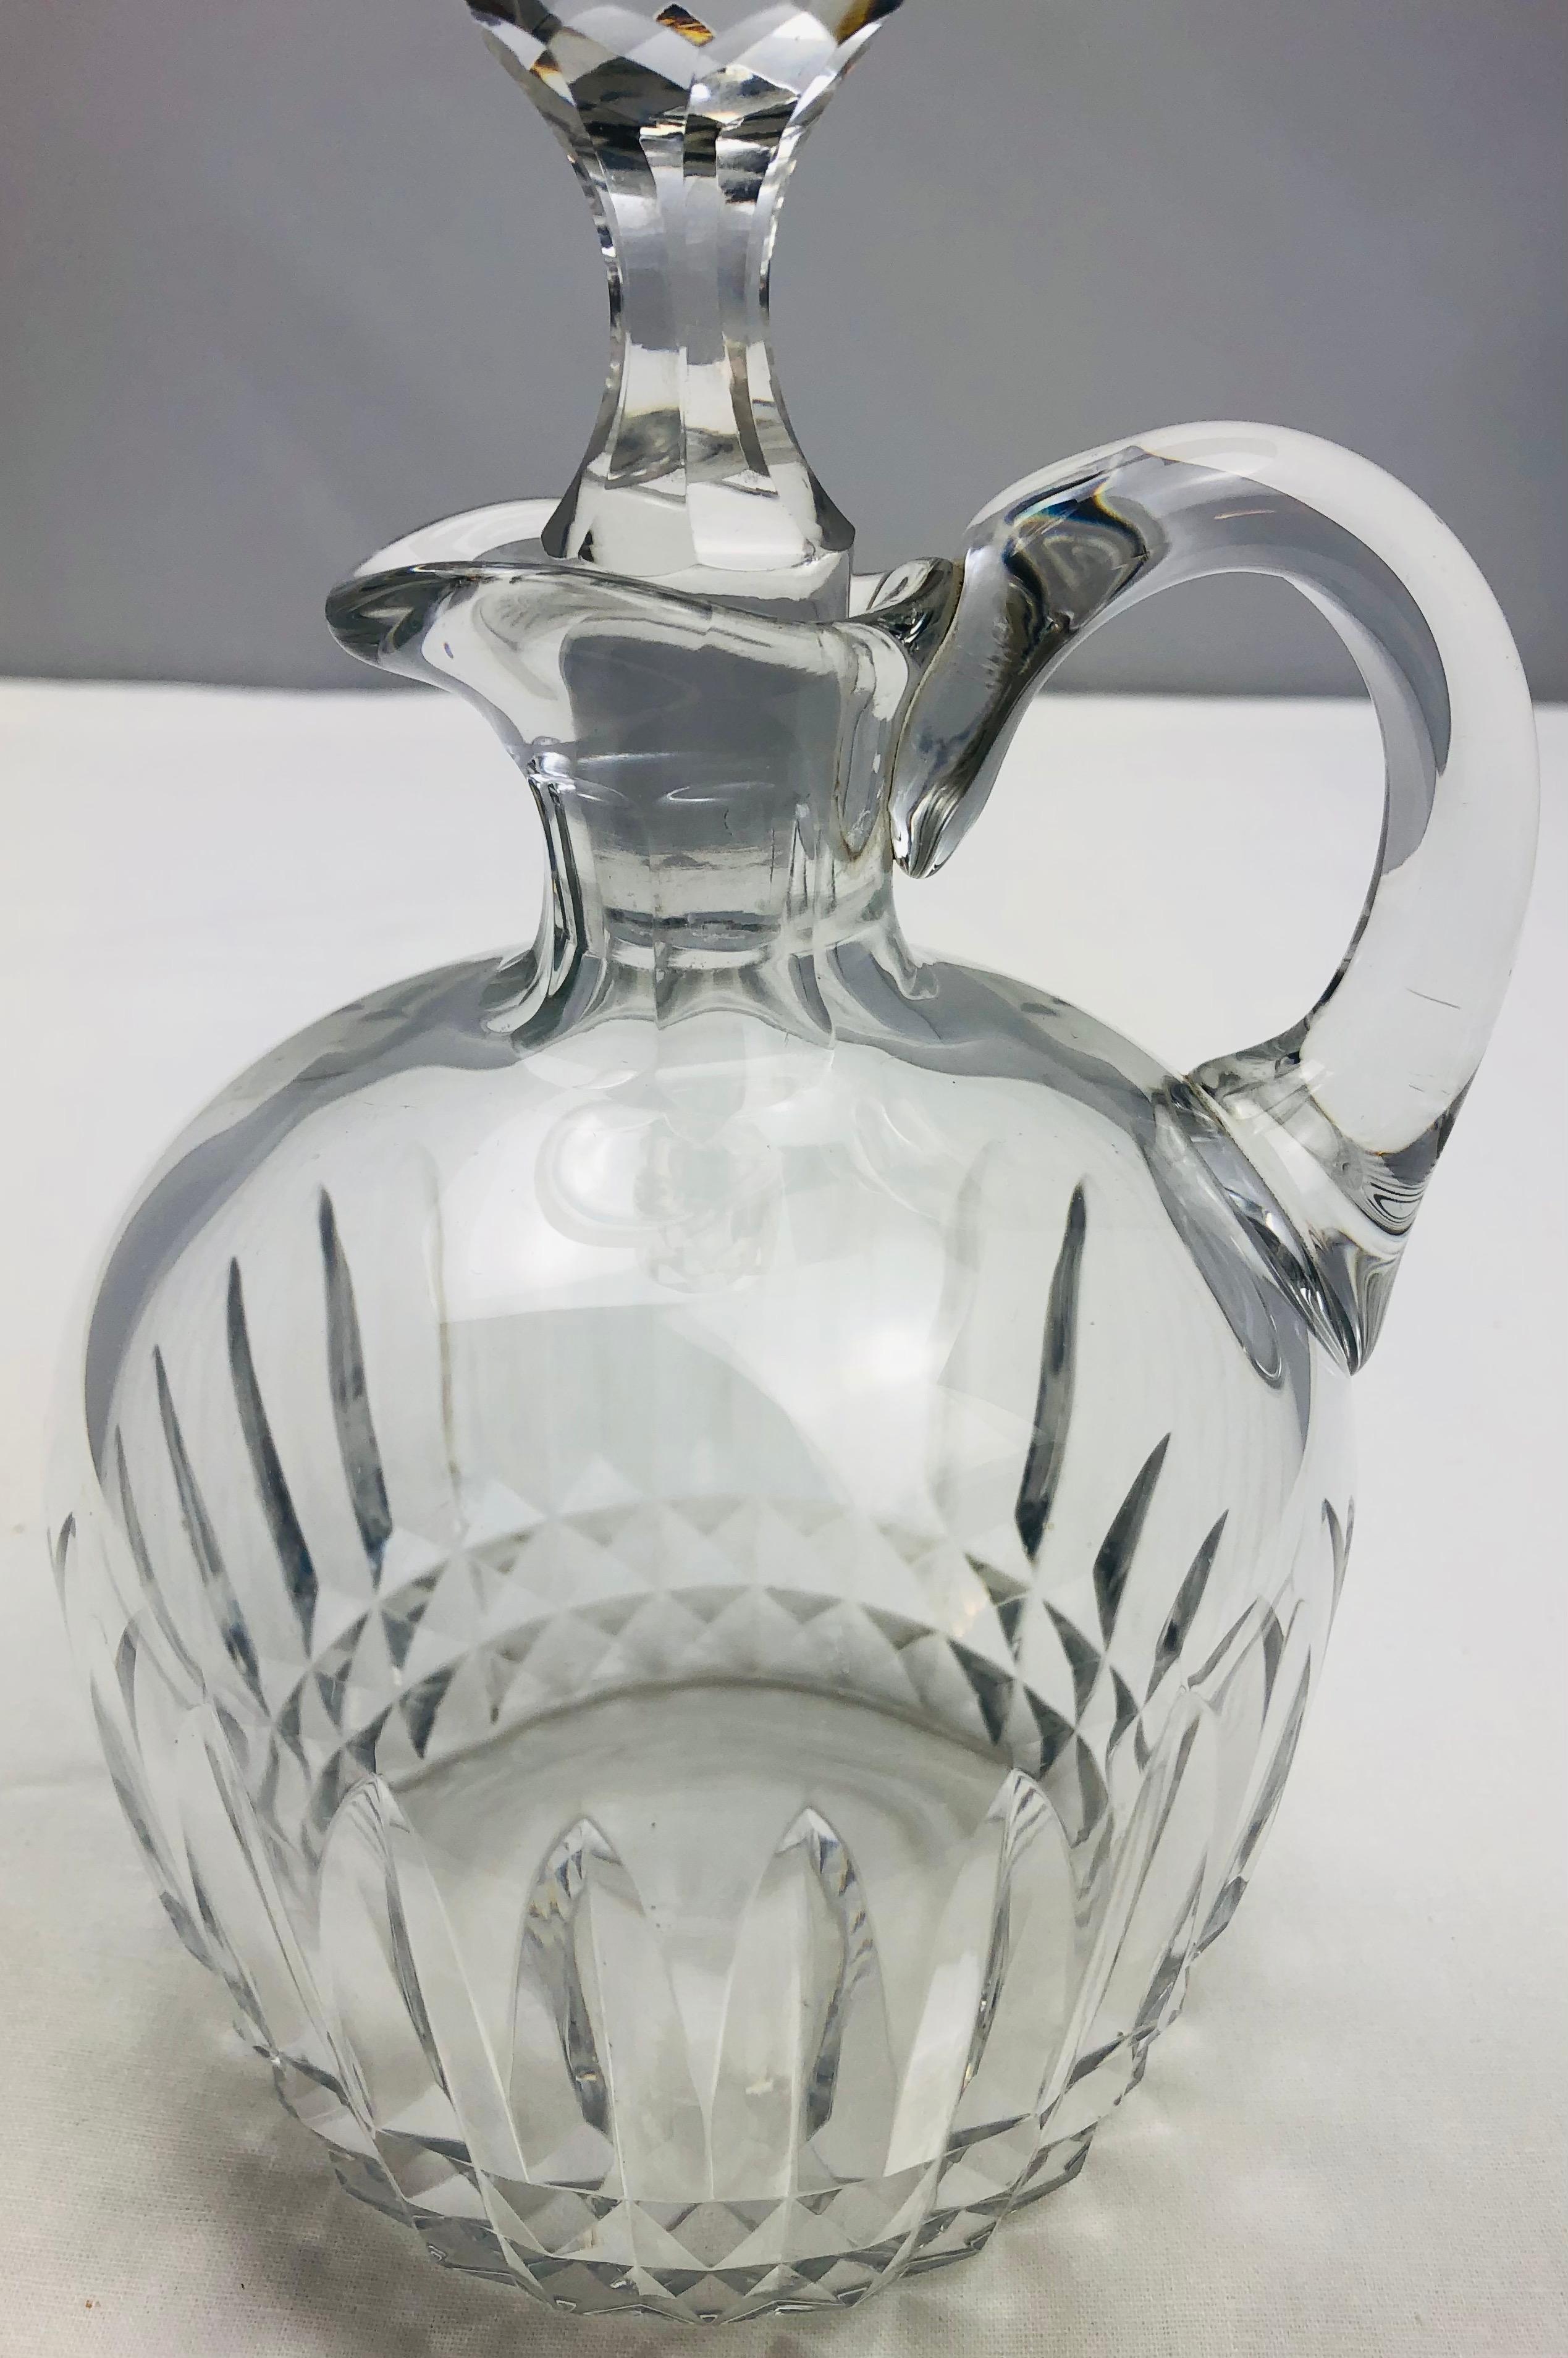 French Baccarat Crystal Liquor Decanter or Carafe, Mid-20th Century